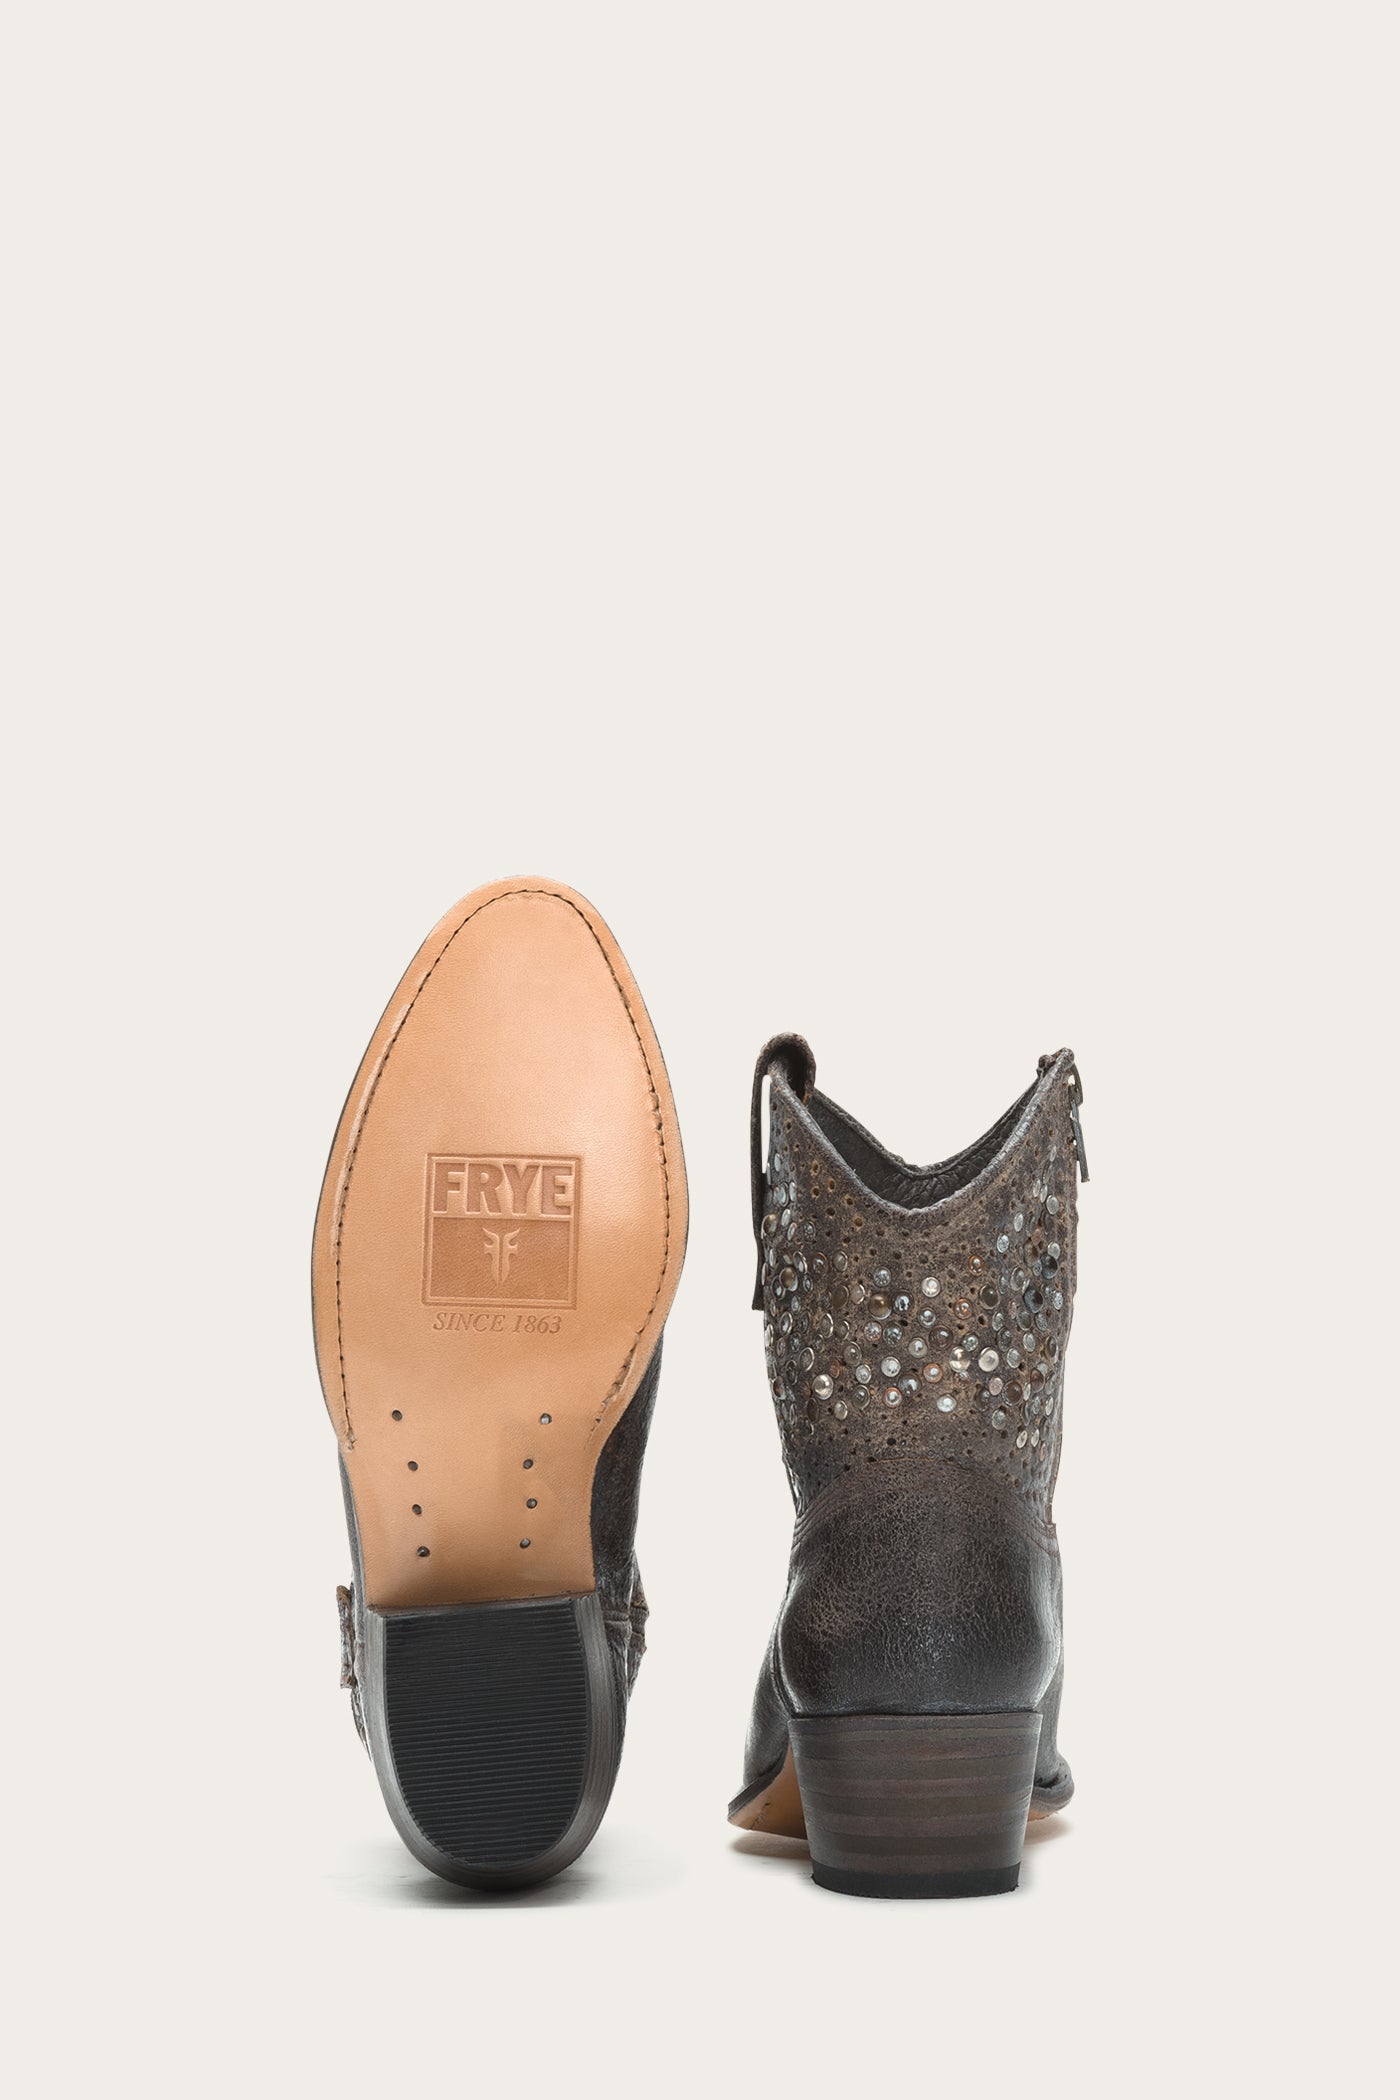 Frye Size Chart Inches